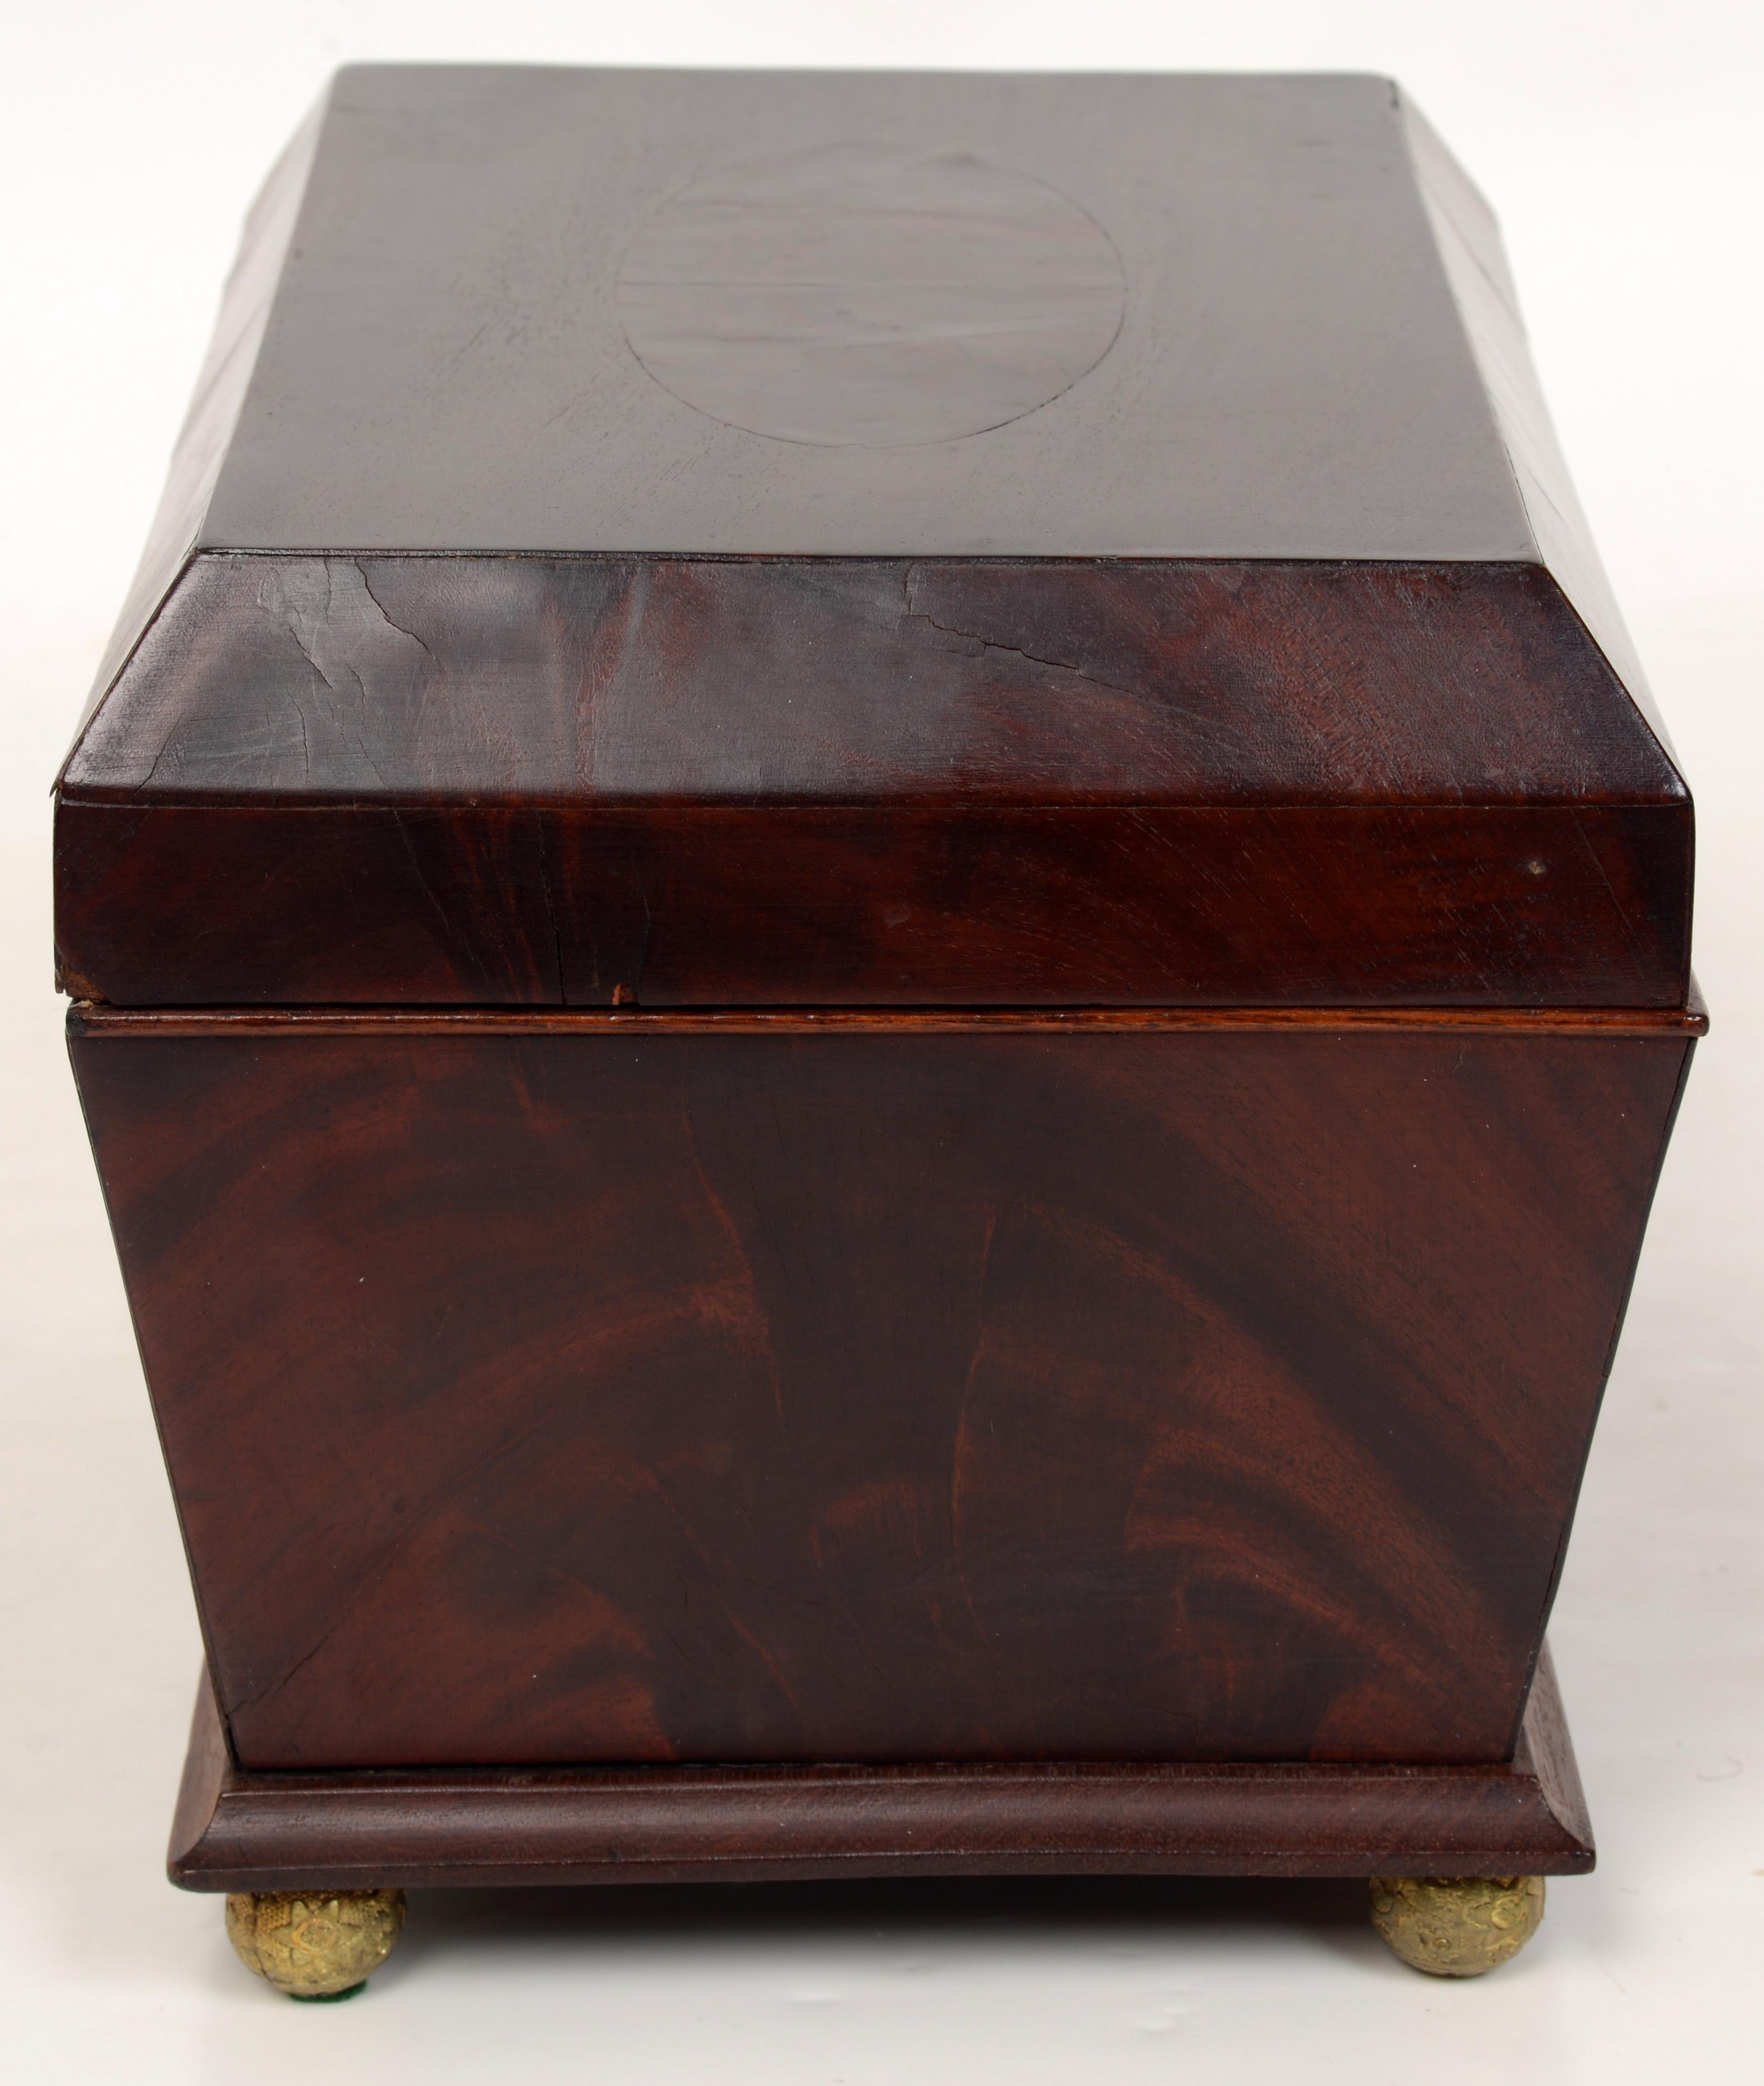 Regency Fan Inlaid Jewelry Box With Fitted Interior and Mirrored Lid, c1810 In Good Condition For Sale In valatie, NY